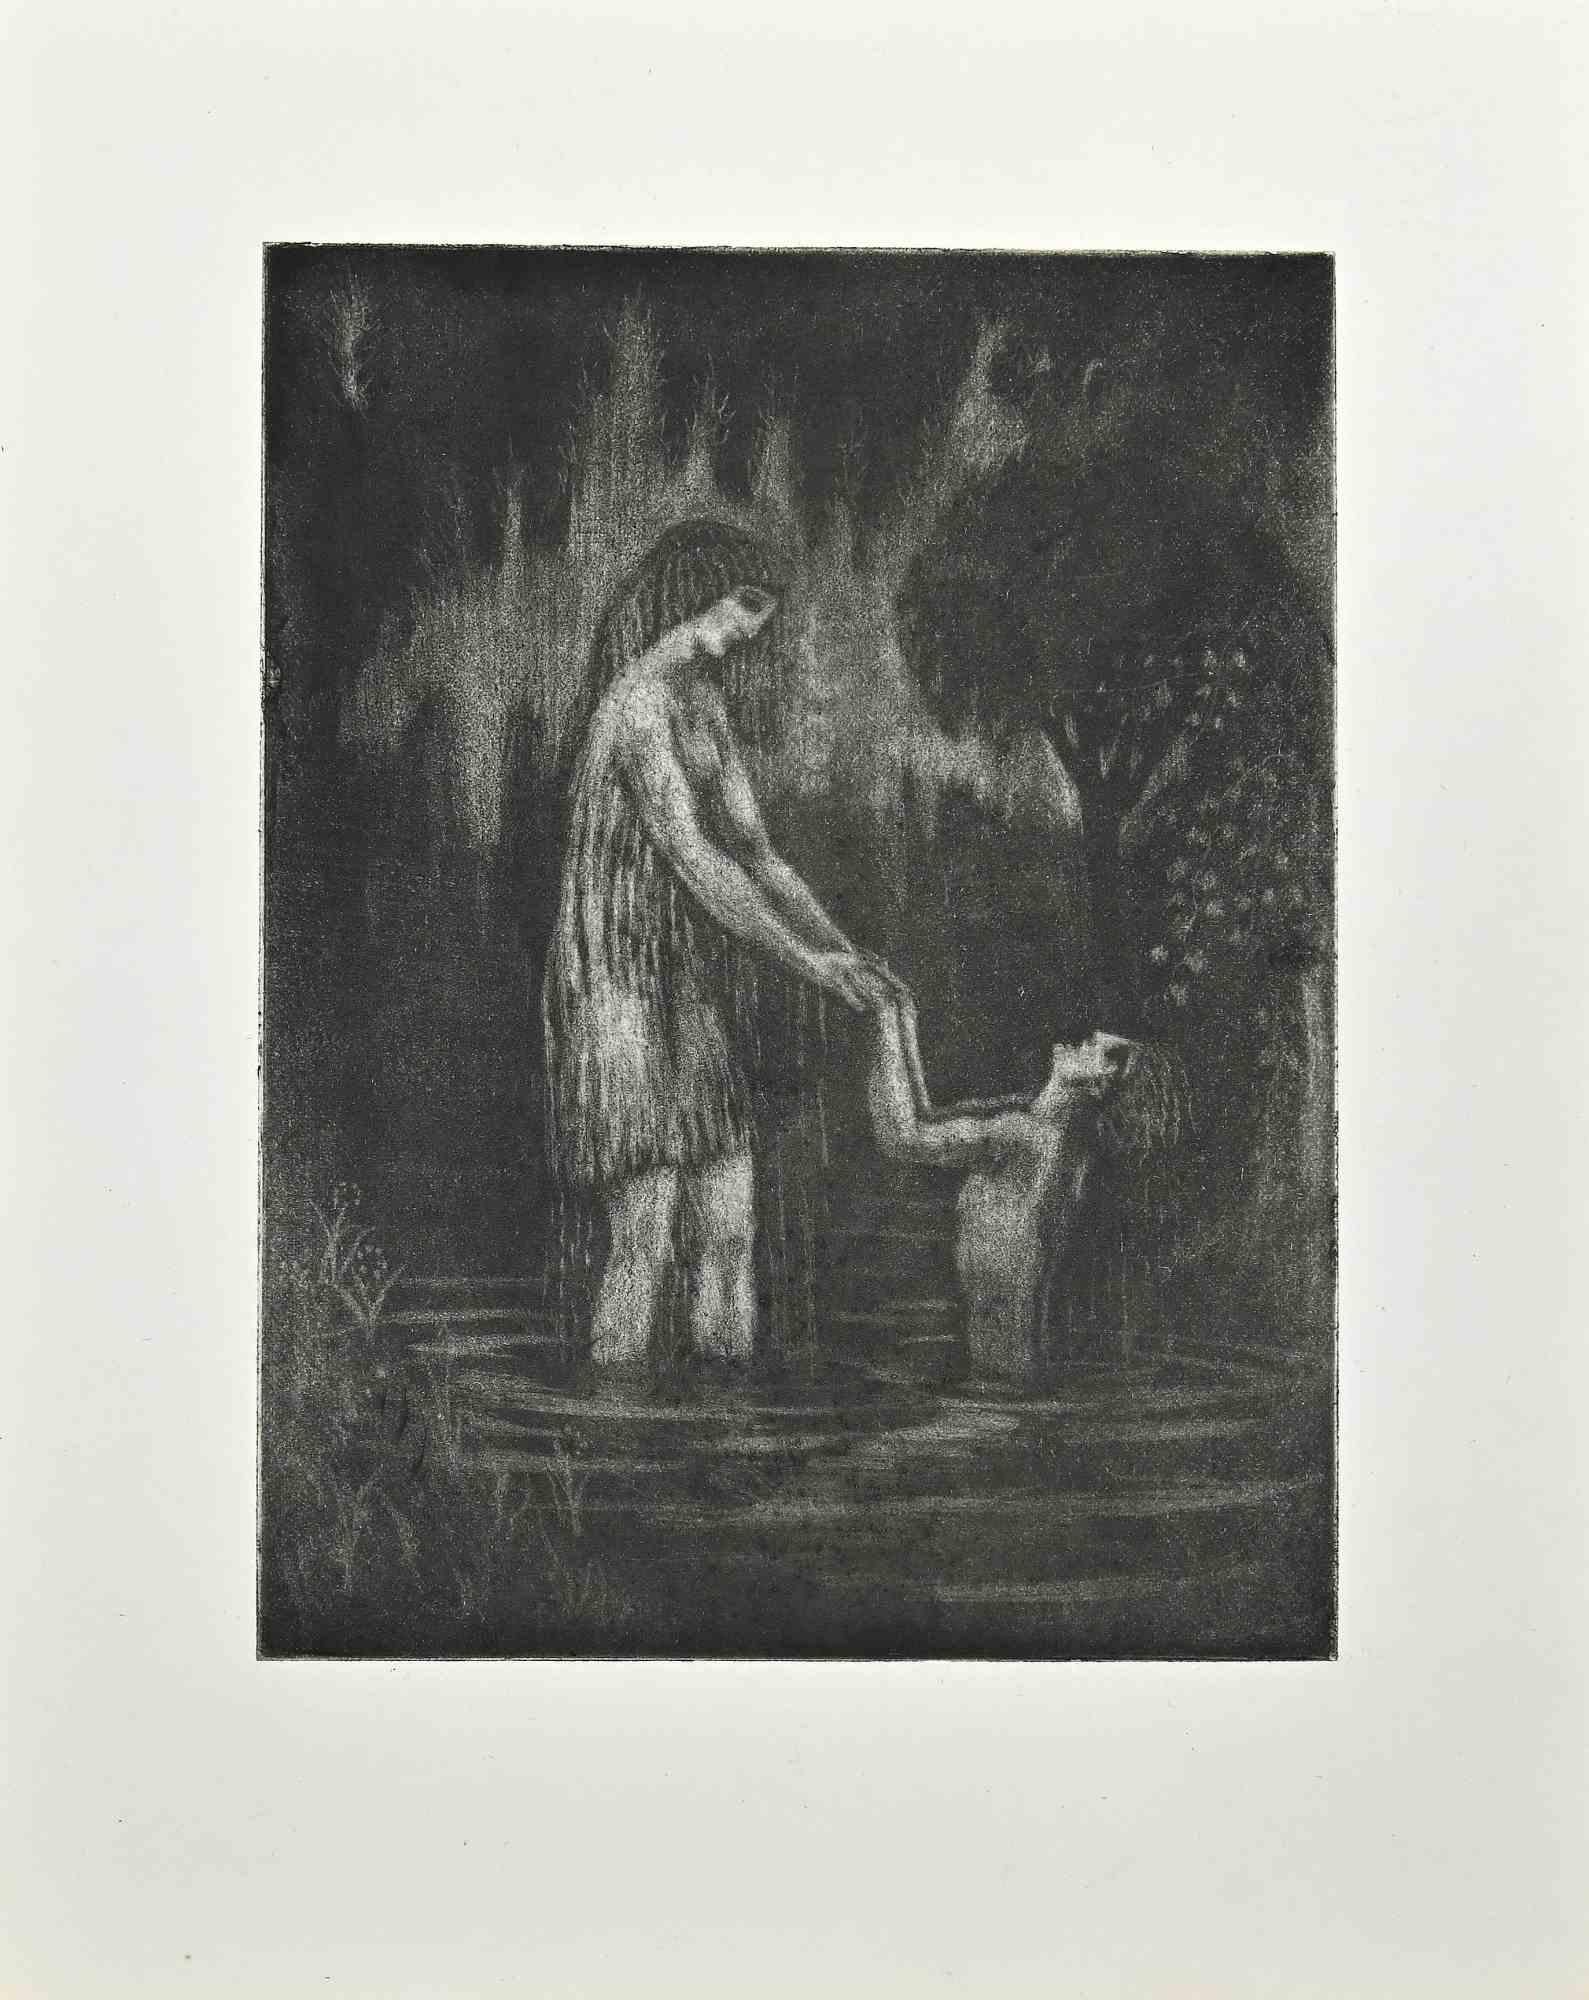 The Shandy Bath - Original Etching by Raphael Drouart - Early 20th century